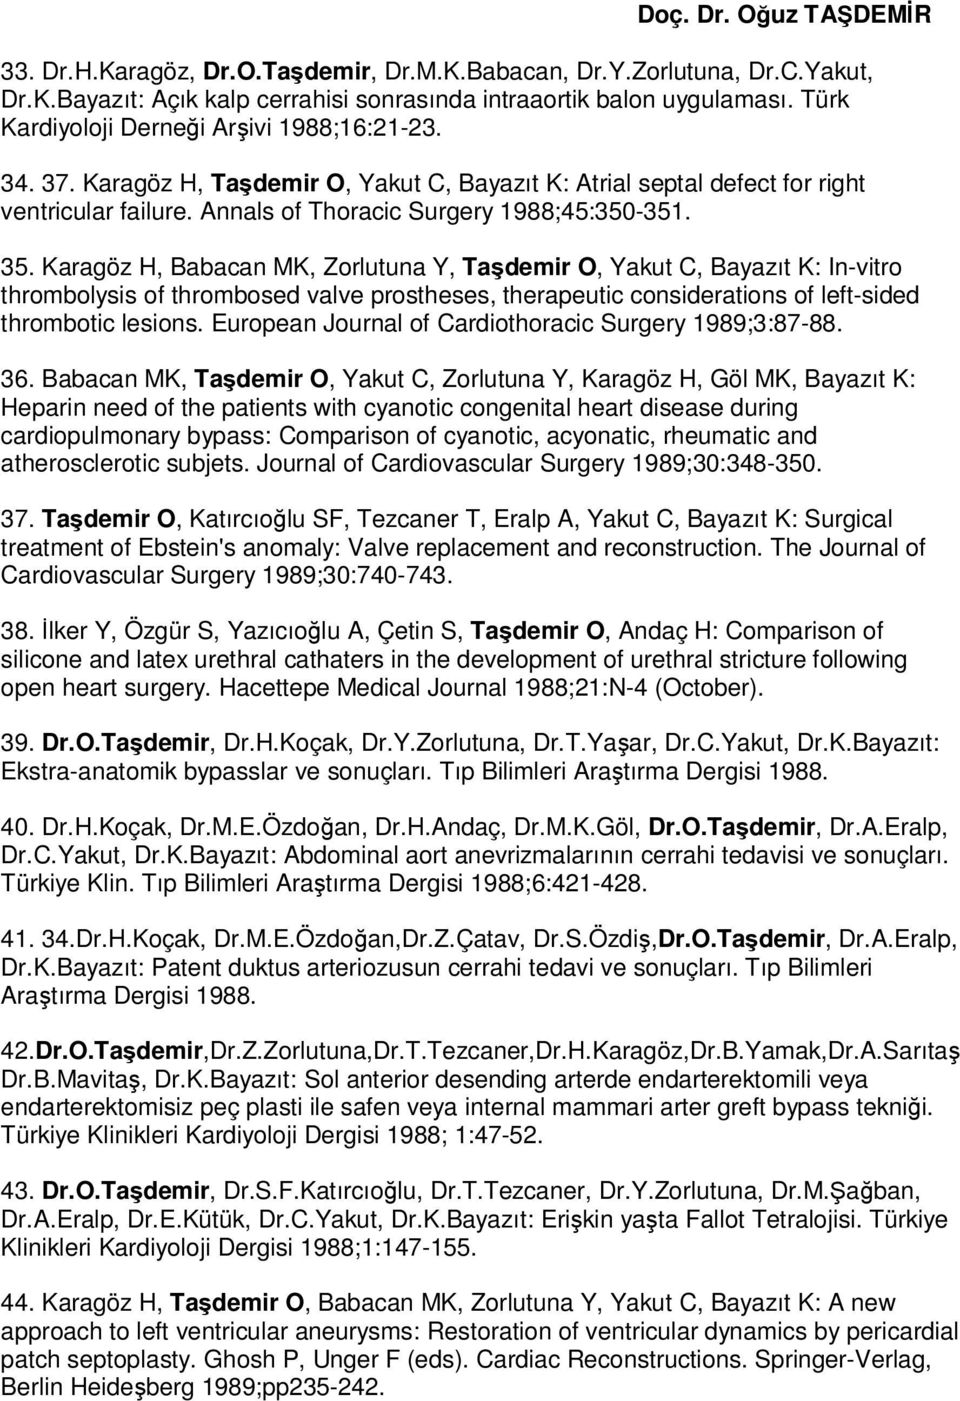 Karagöz H, Babacan MK, Zorlutuna Y, Taşdemir O, Yakut C, Bayazıt K: In-vitro thrombolysis of thrombosed valve prostheses, therapeutic considerations of left-sided thrombotic lesions.